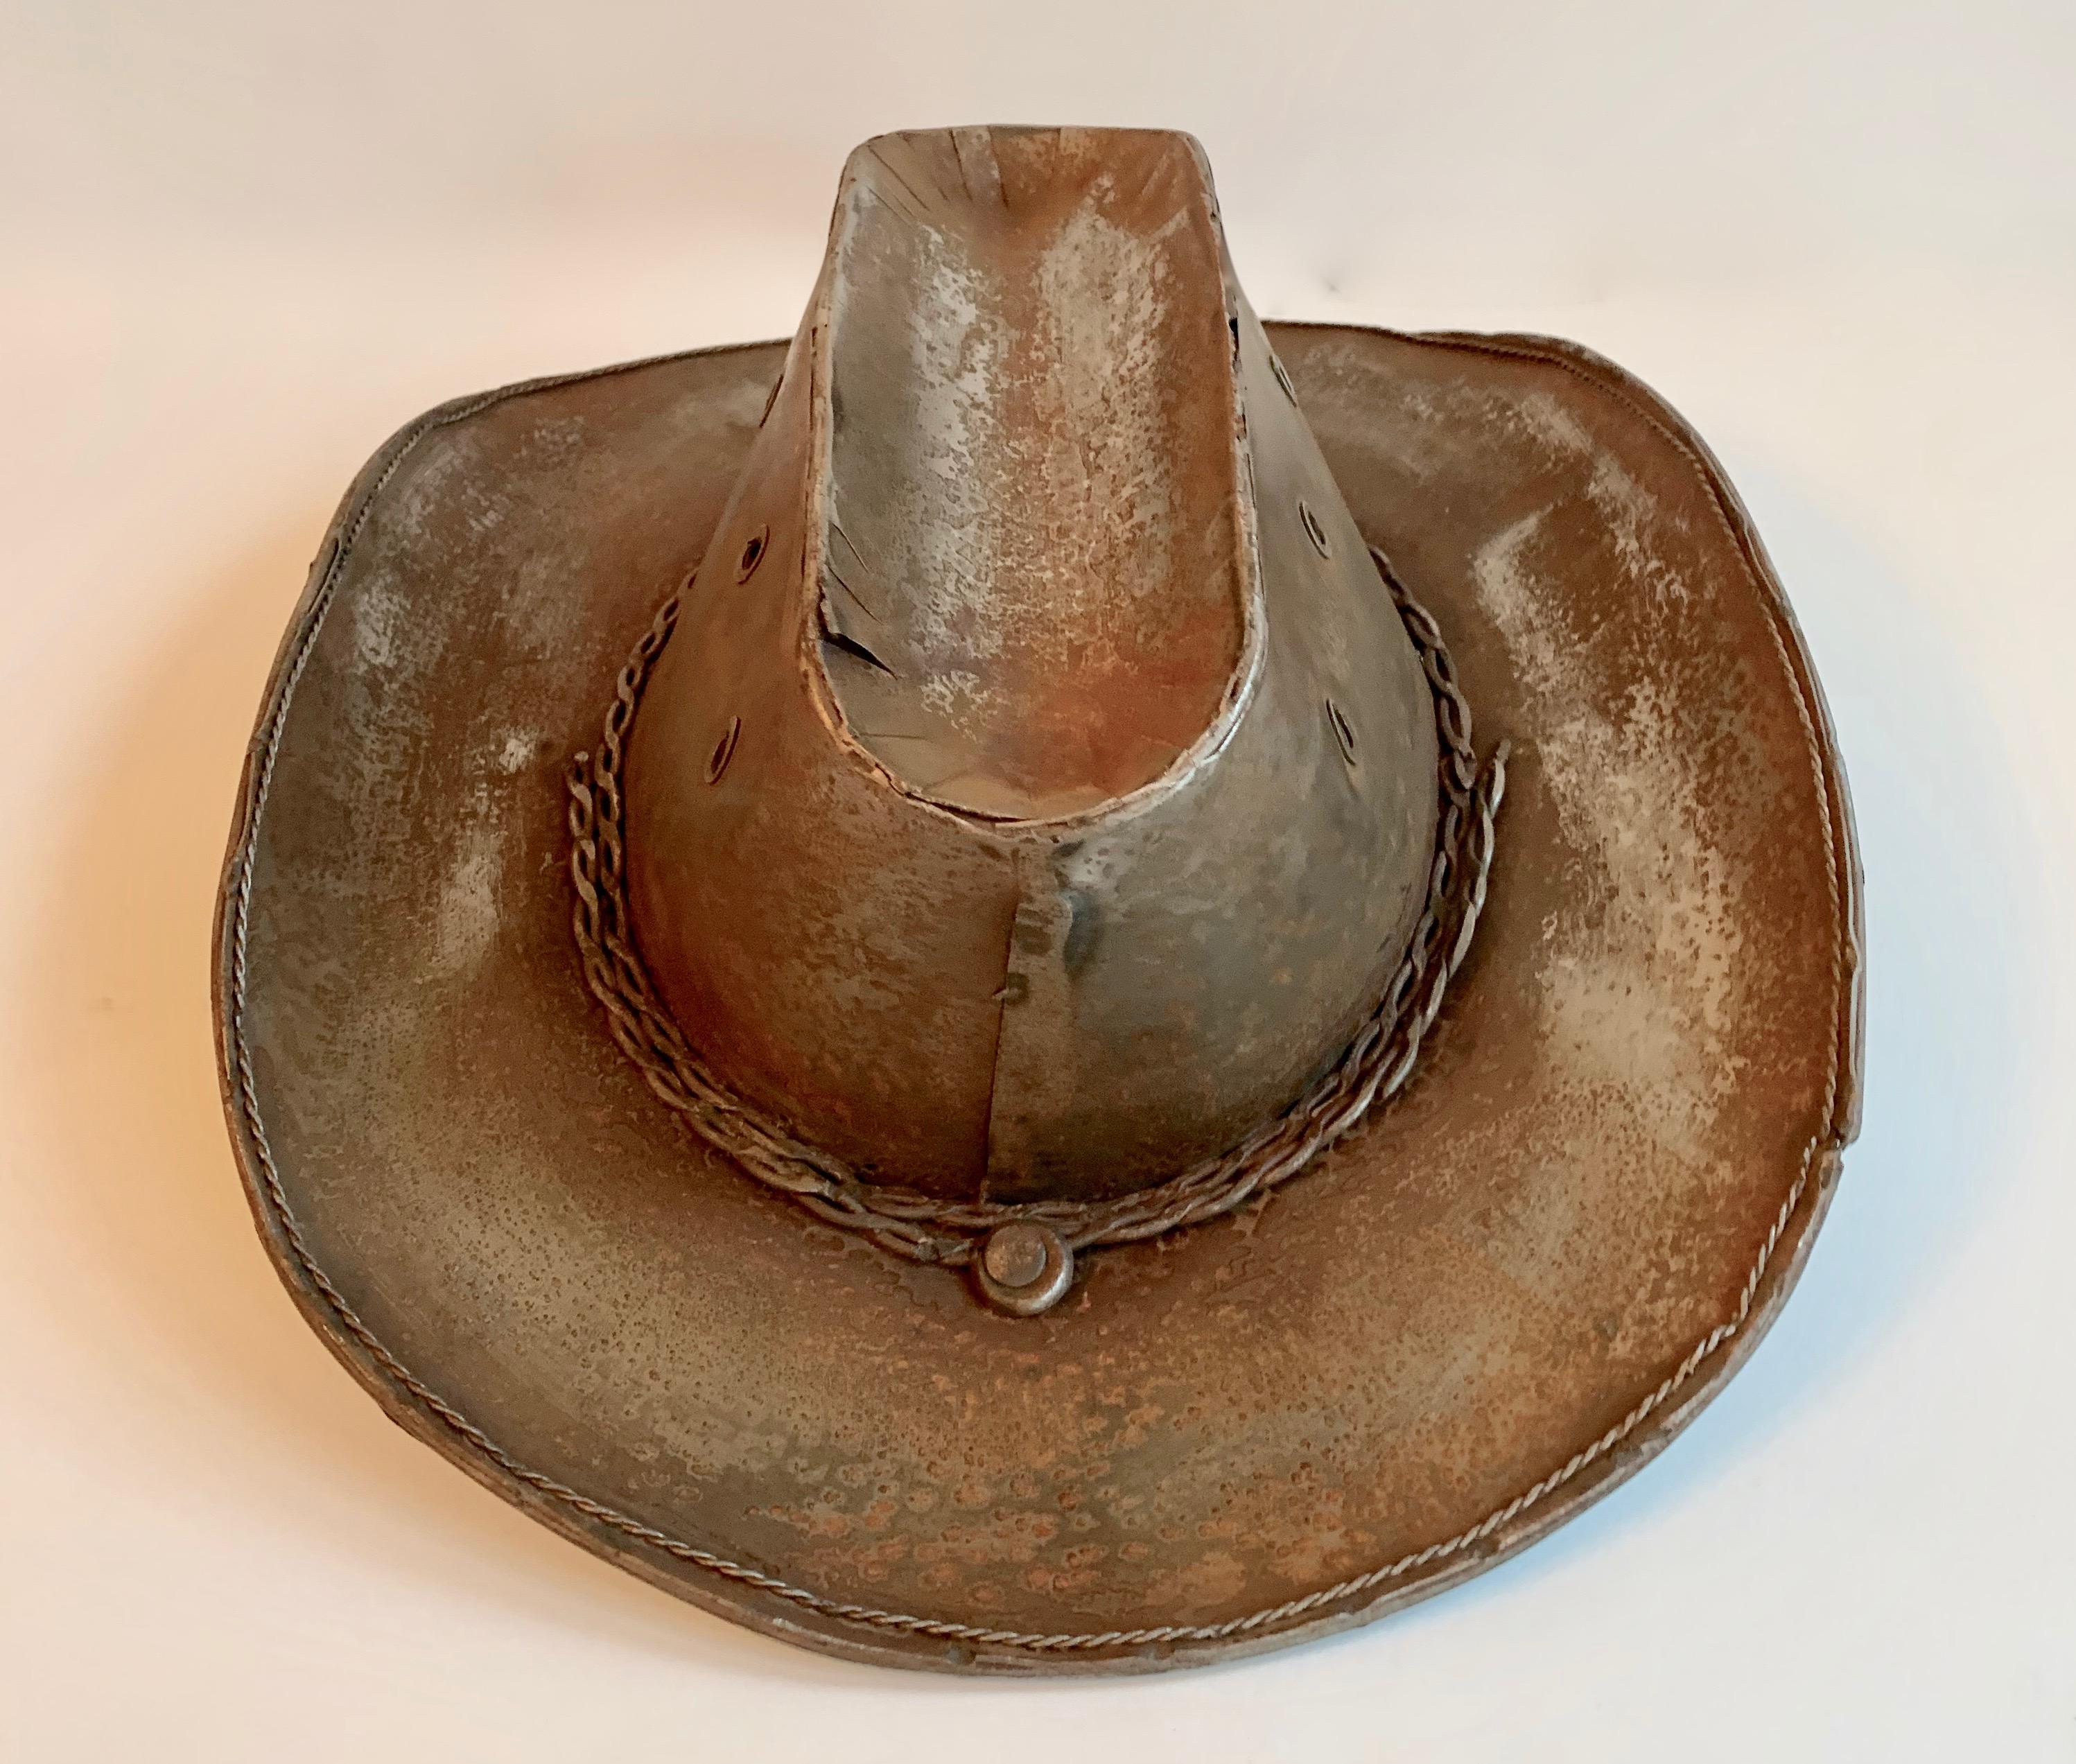 A handsome cowboy hat most likely used for display, now making a great decorative piece. Welded of metal / tin and styled with the details of any cowboy hat - air holes, rope, and the perfect bill.